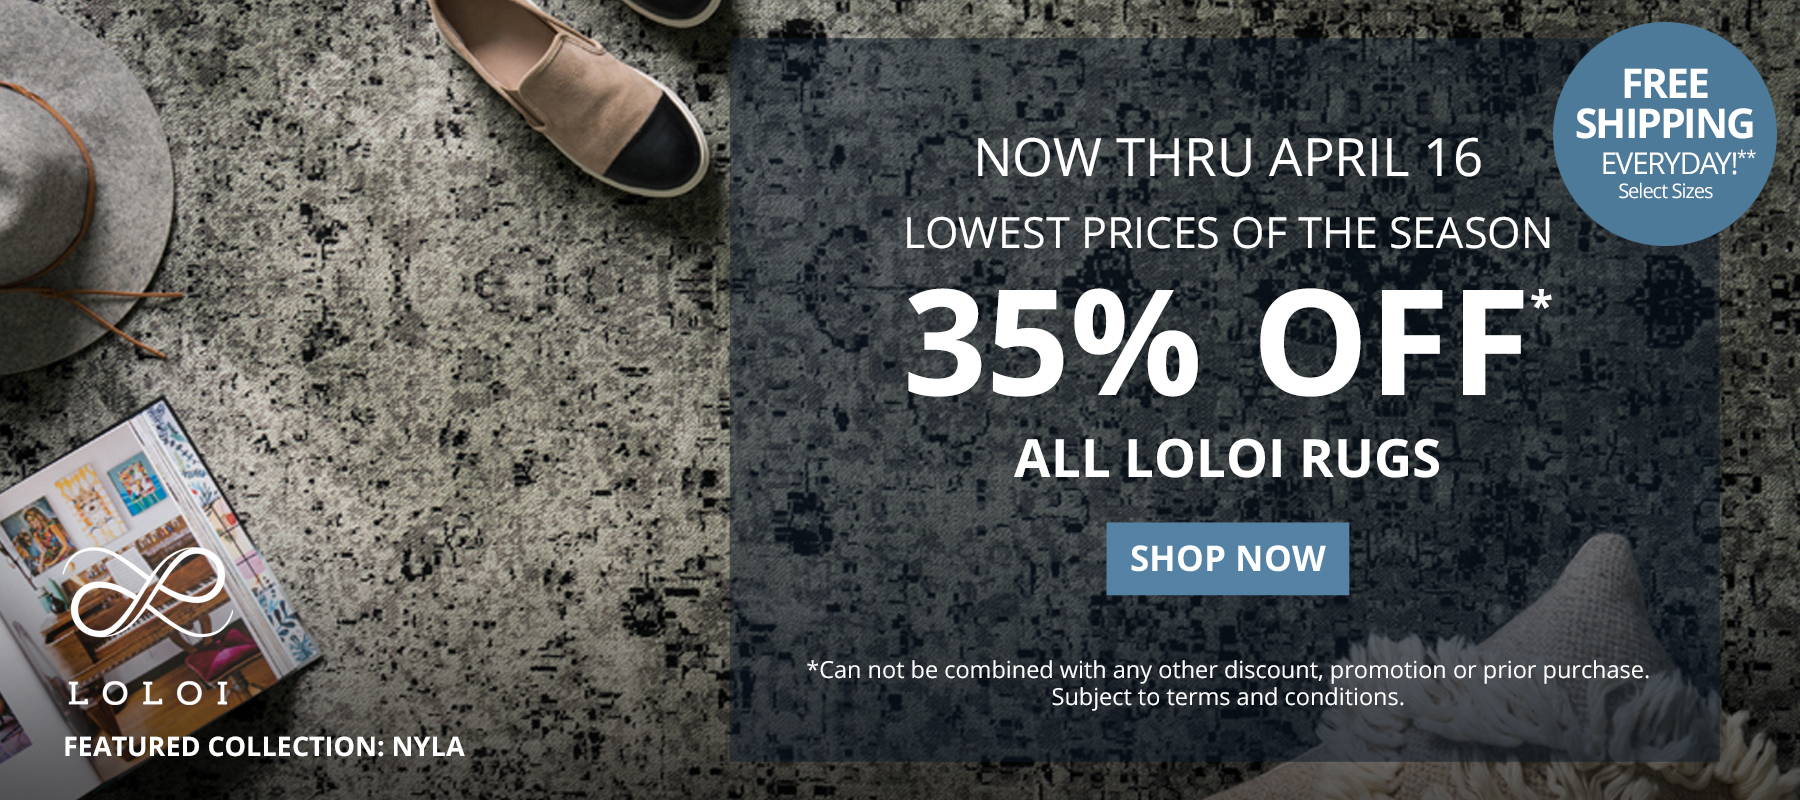 Now Thru April 16. Lowest Prices of the Season. 35% Off* All Loloi Rugs. Free Shipping Everyday!** Select Sizes. *Can not be combined with any other discount, promotion or prior purchase. Subject to terms and conditions. Shop Now.